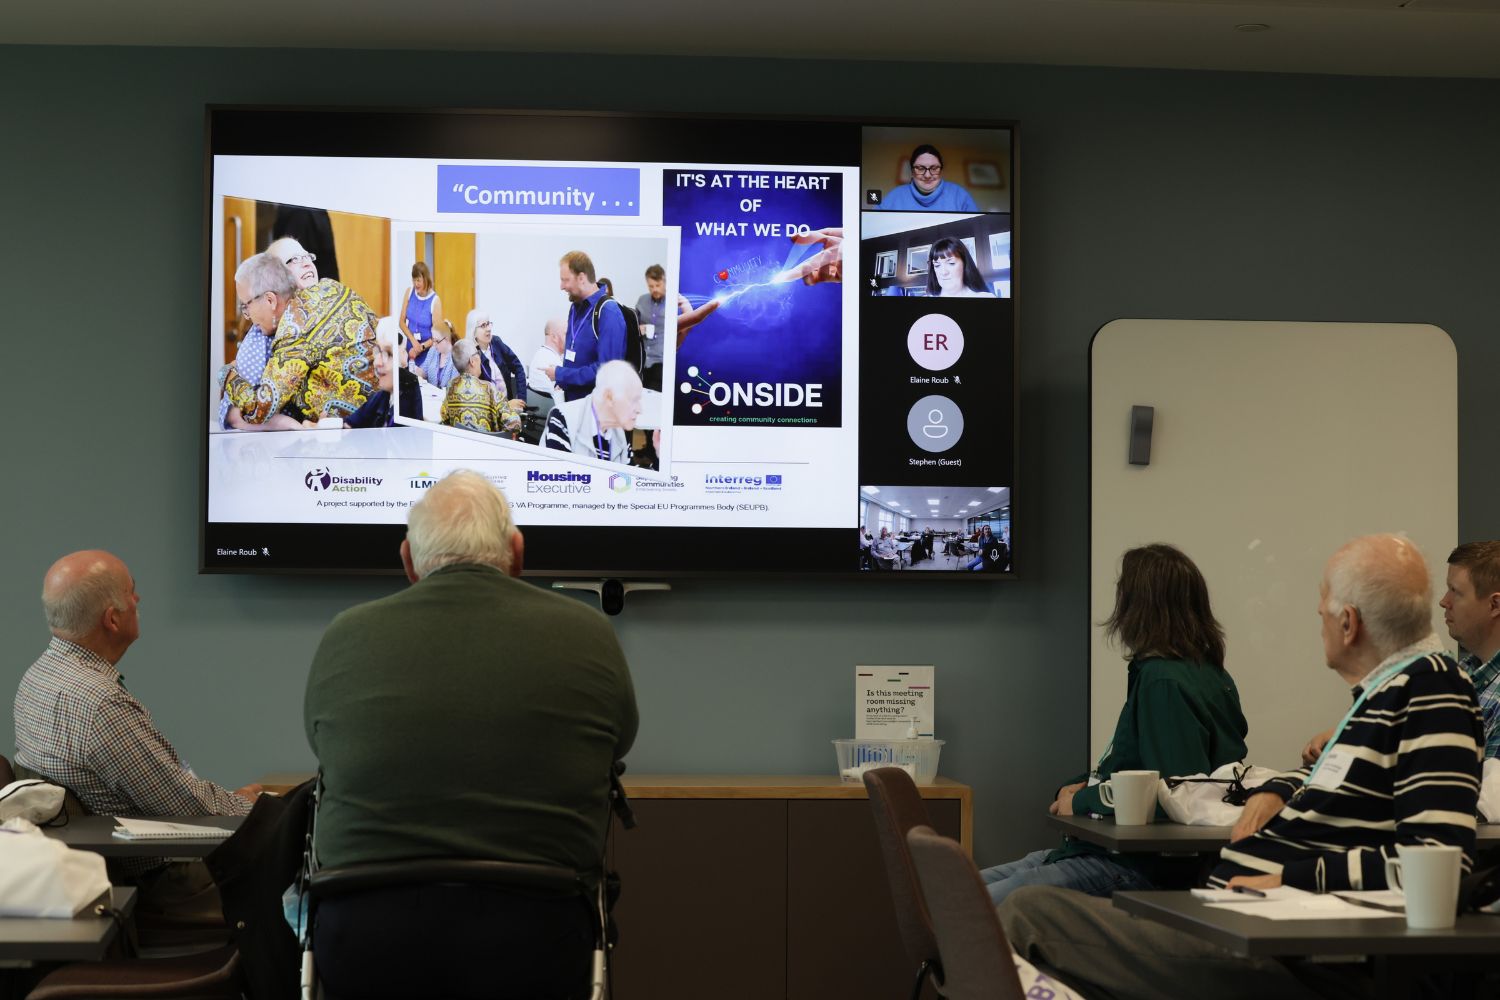 This photograph shows a group of people in the room together looking at a large screen which includes a number of people who are joining the even via Zoom.  This is to show how the project has continued to adapt to the covid pandemic by using technology to facilitate hybrid meeting.